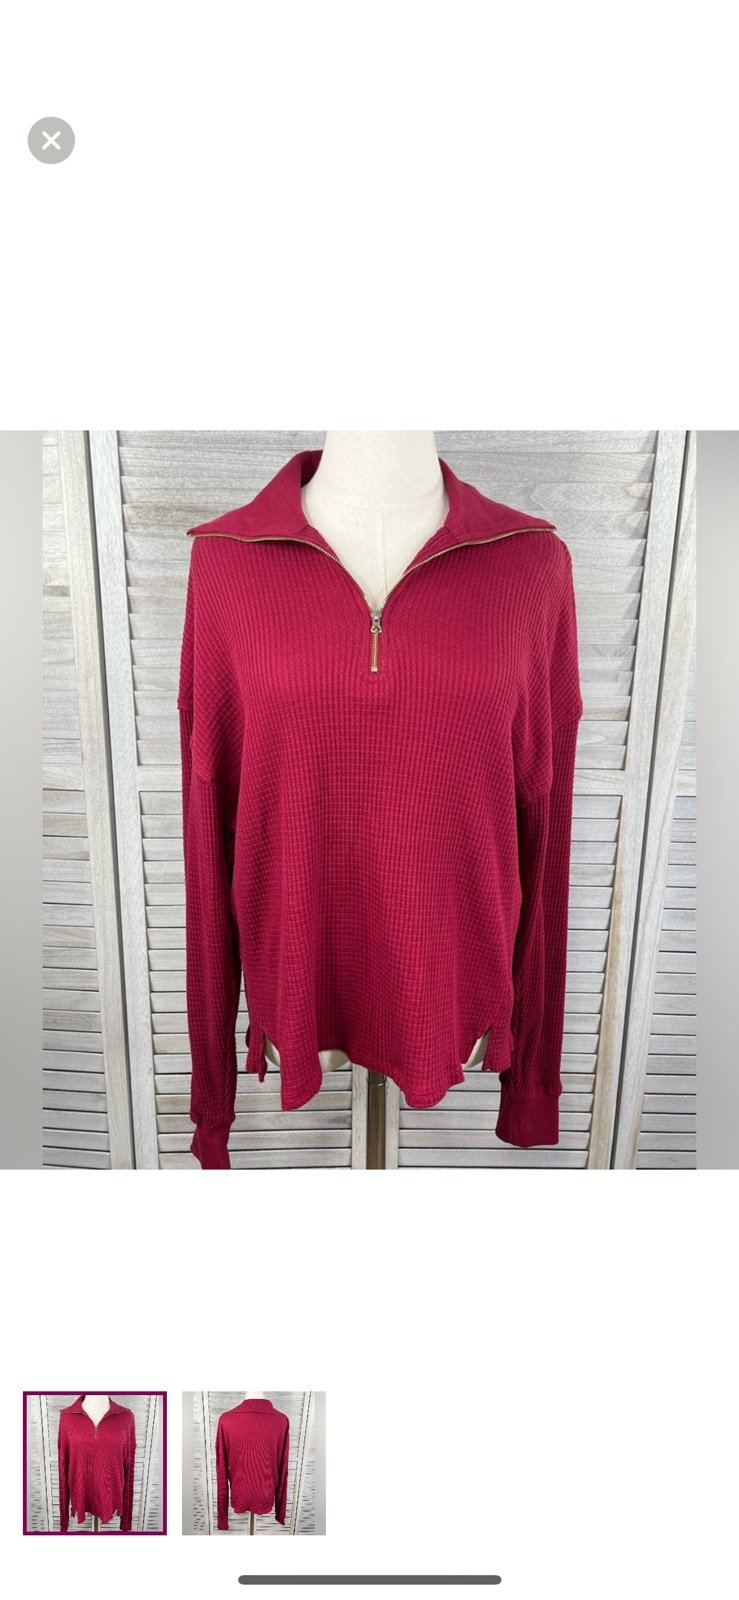 Popular UNIVERSAL THREAD Thermal Knit Long Sleeve Zipped Neckline Cranberry-Large oNfmbeKsx Great